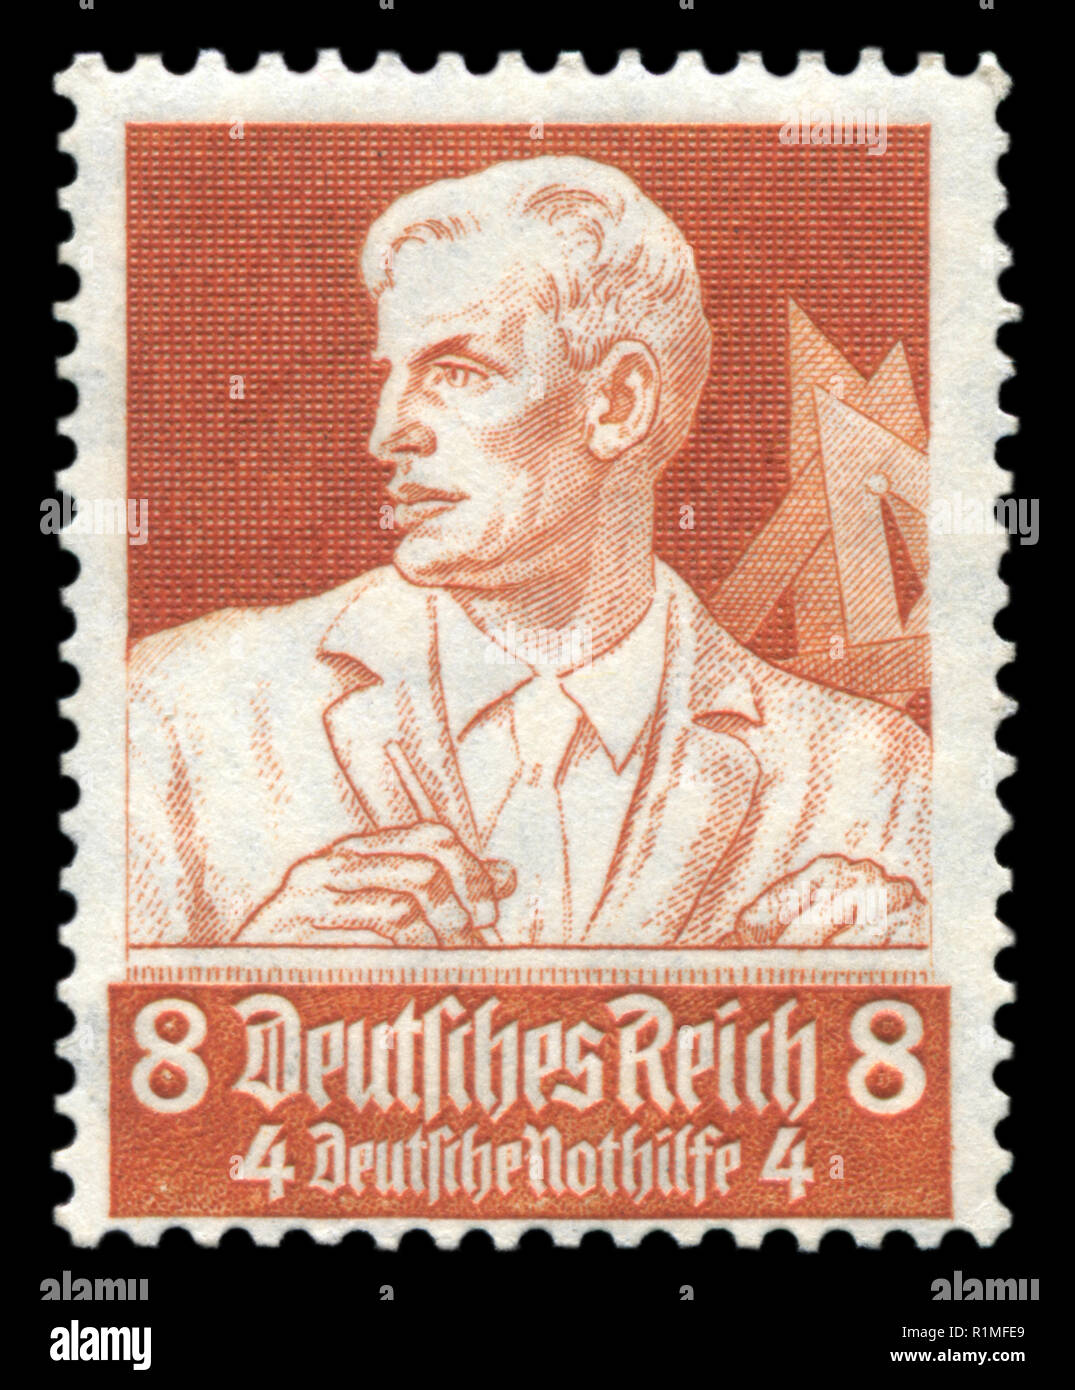 German postage stamp: Architect with a pencil and a square. Emergency assistance Fund. Honourable professions, 1934, Germany, the Third Reich Stock Photo